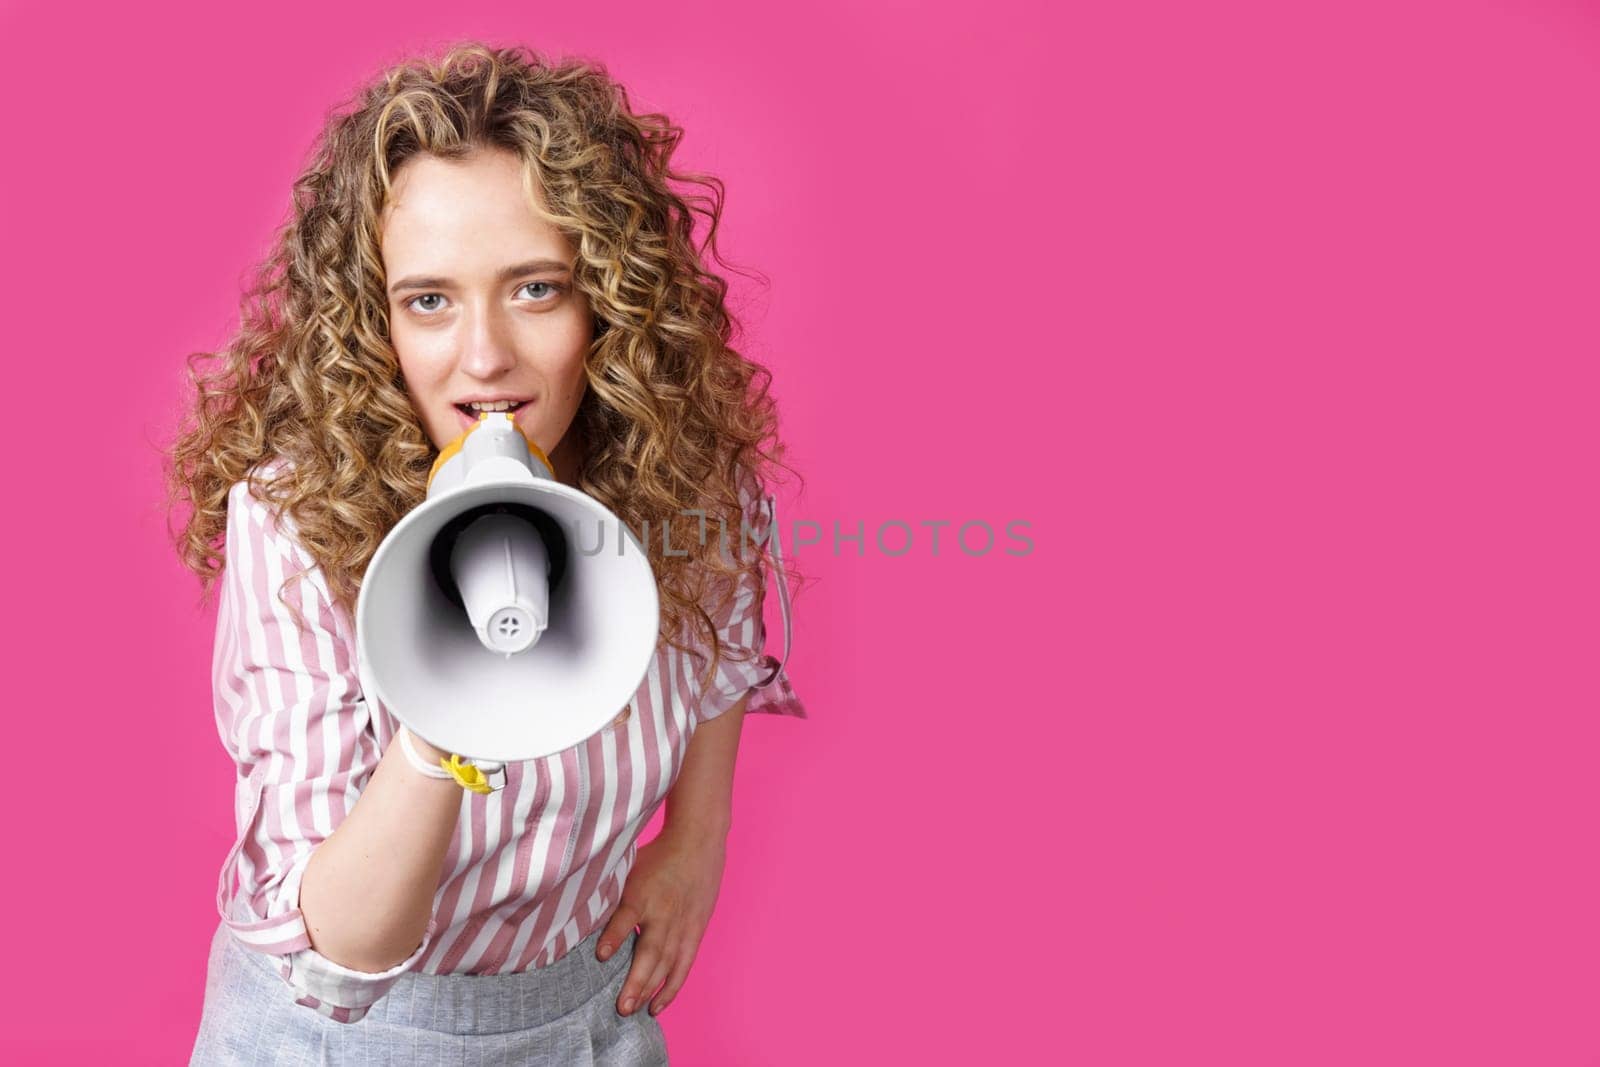 Young woman speaks into a megaphone. Isolated pink background. by Sd28DimoN_1976